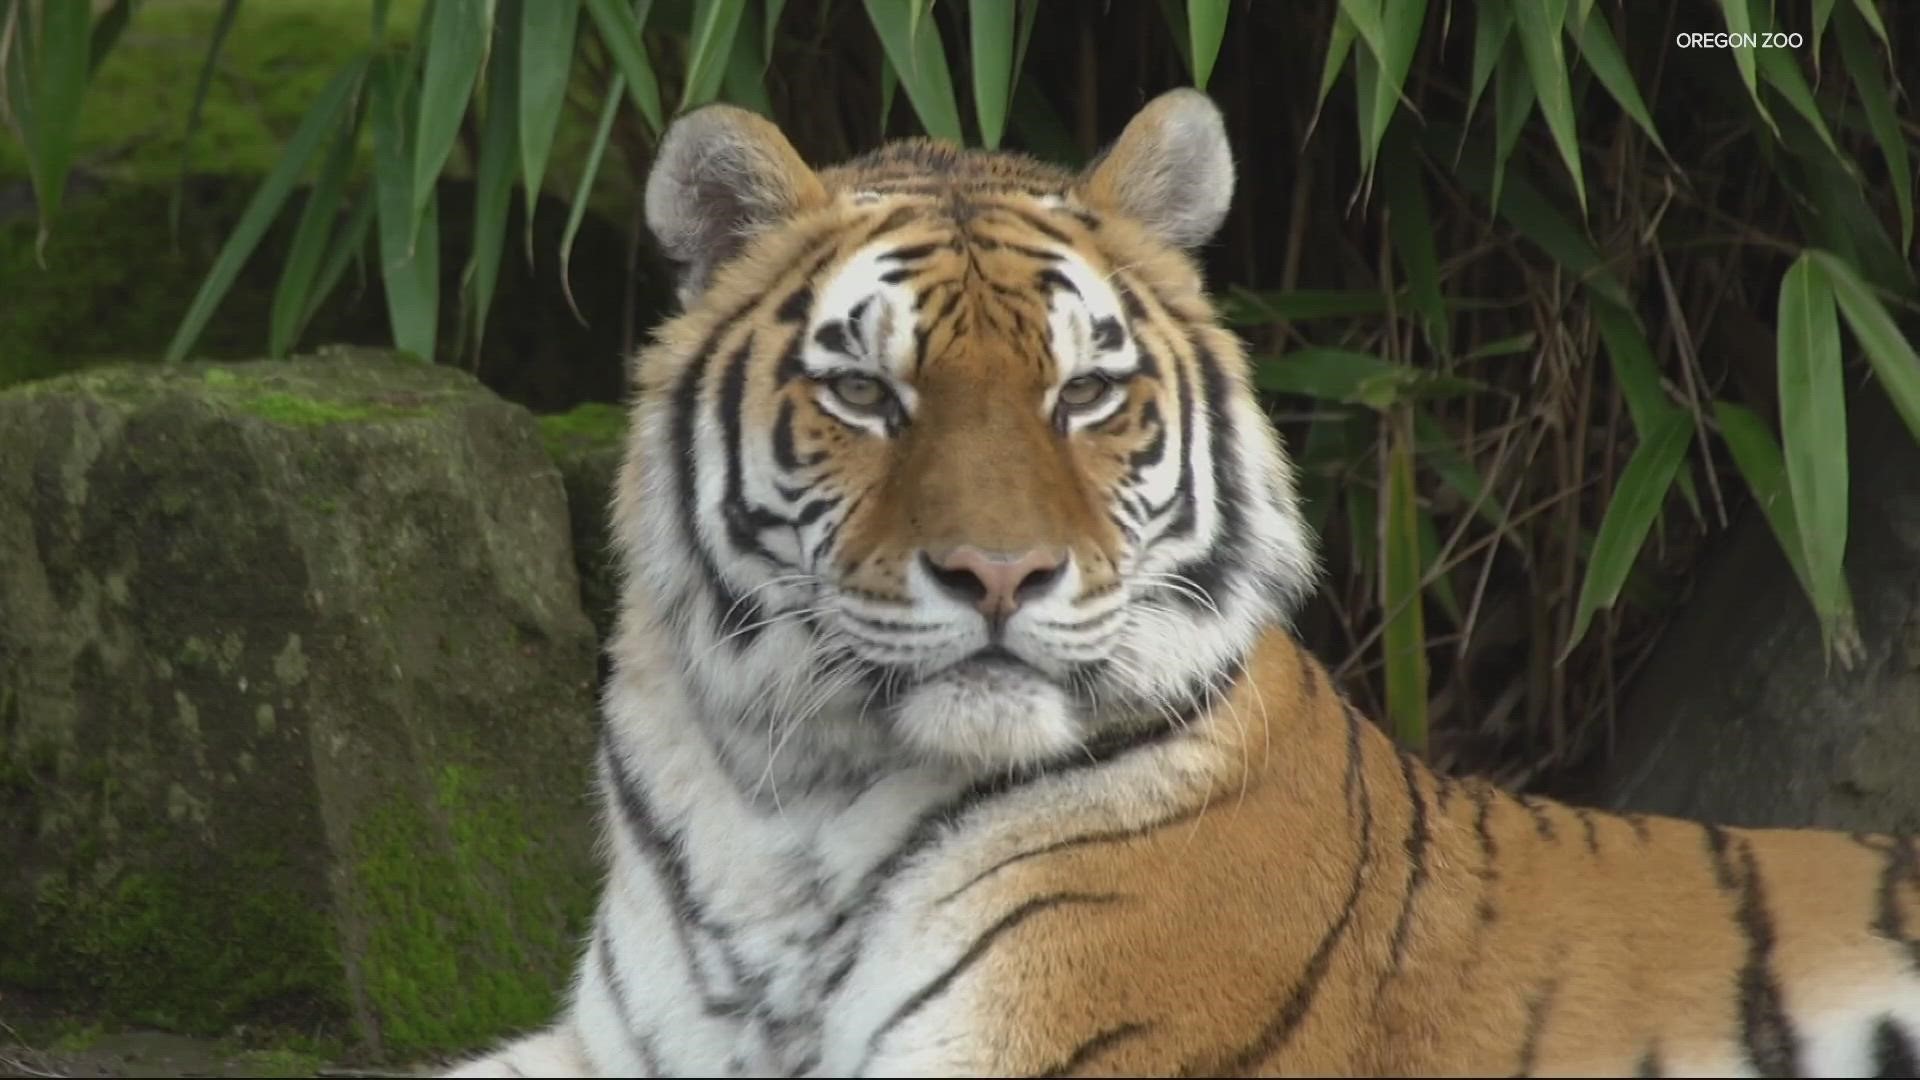 Much-loved tiger Bernadette was transported to OSU for an MRI after showing troubling symptoms last year, but is now recovered.